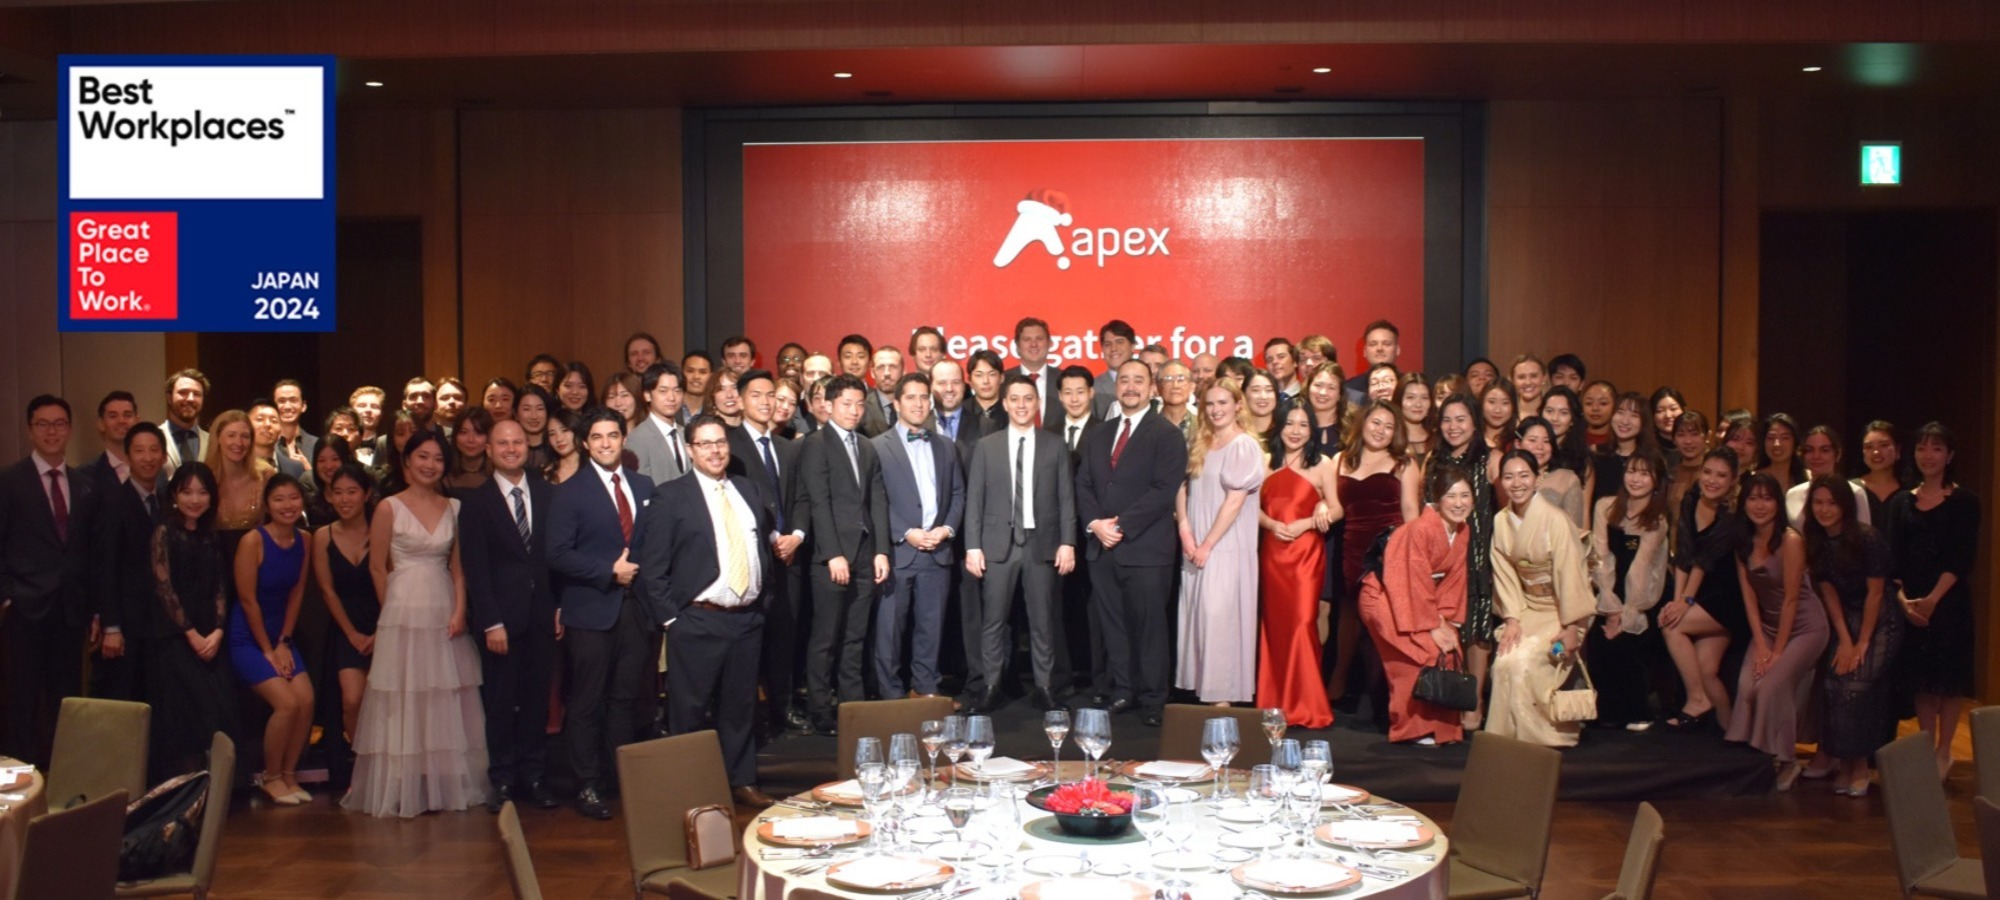 apex-career-page-gptw-best-workplaces-2024